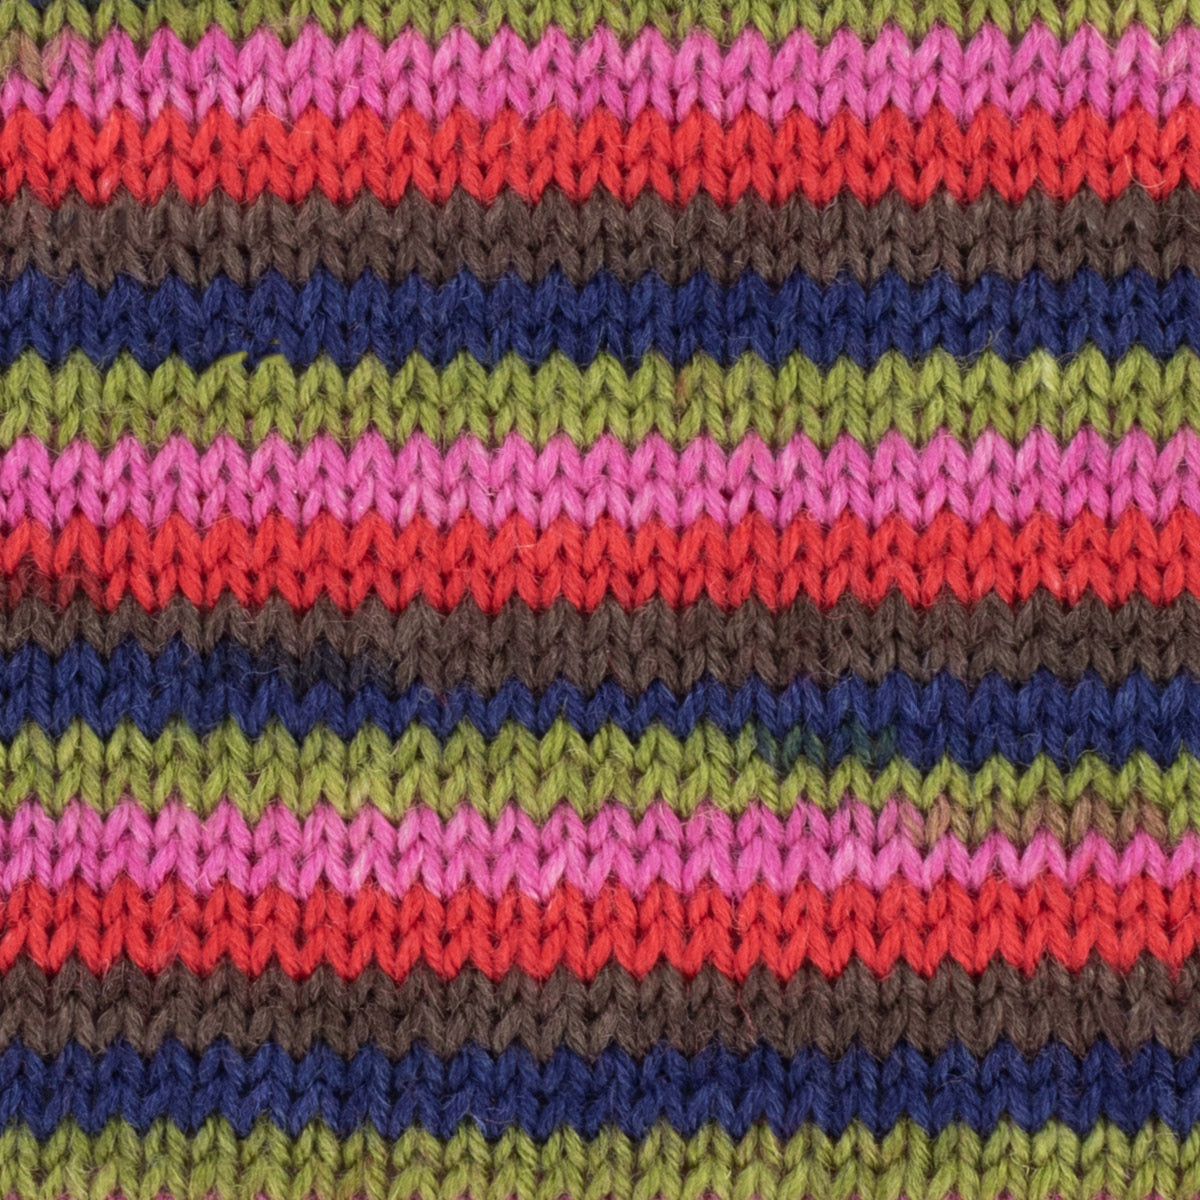 West Yorkshire Spinners Colour Lab DK - Zandra Rhodes